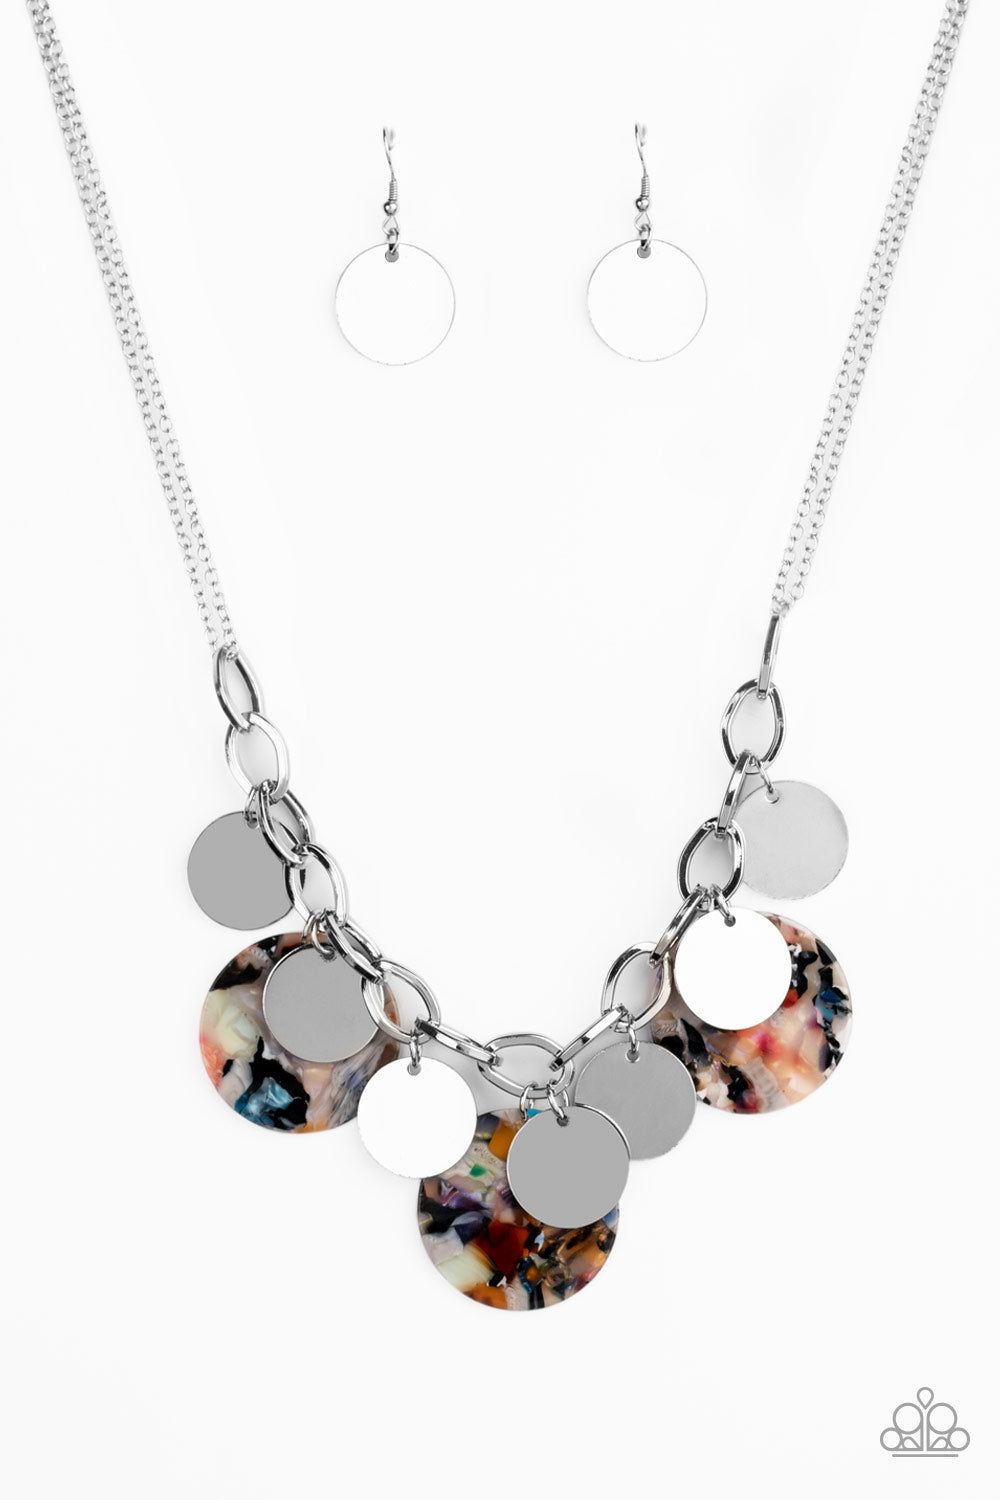 Confetti Confection - Multi Necklace - Jazzy Jewels With Lady J